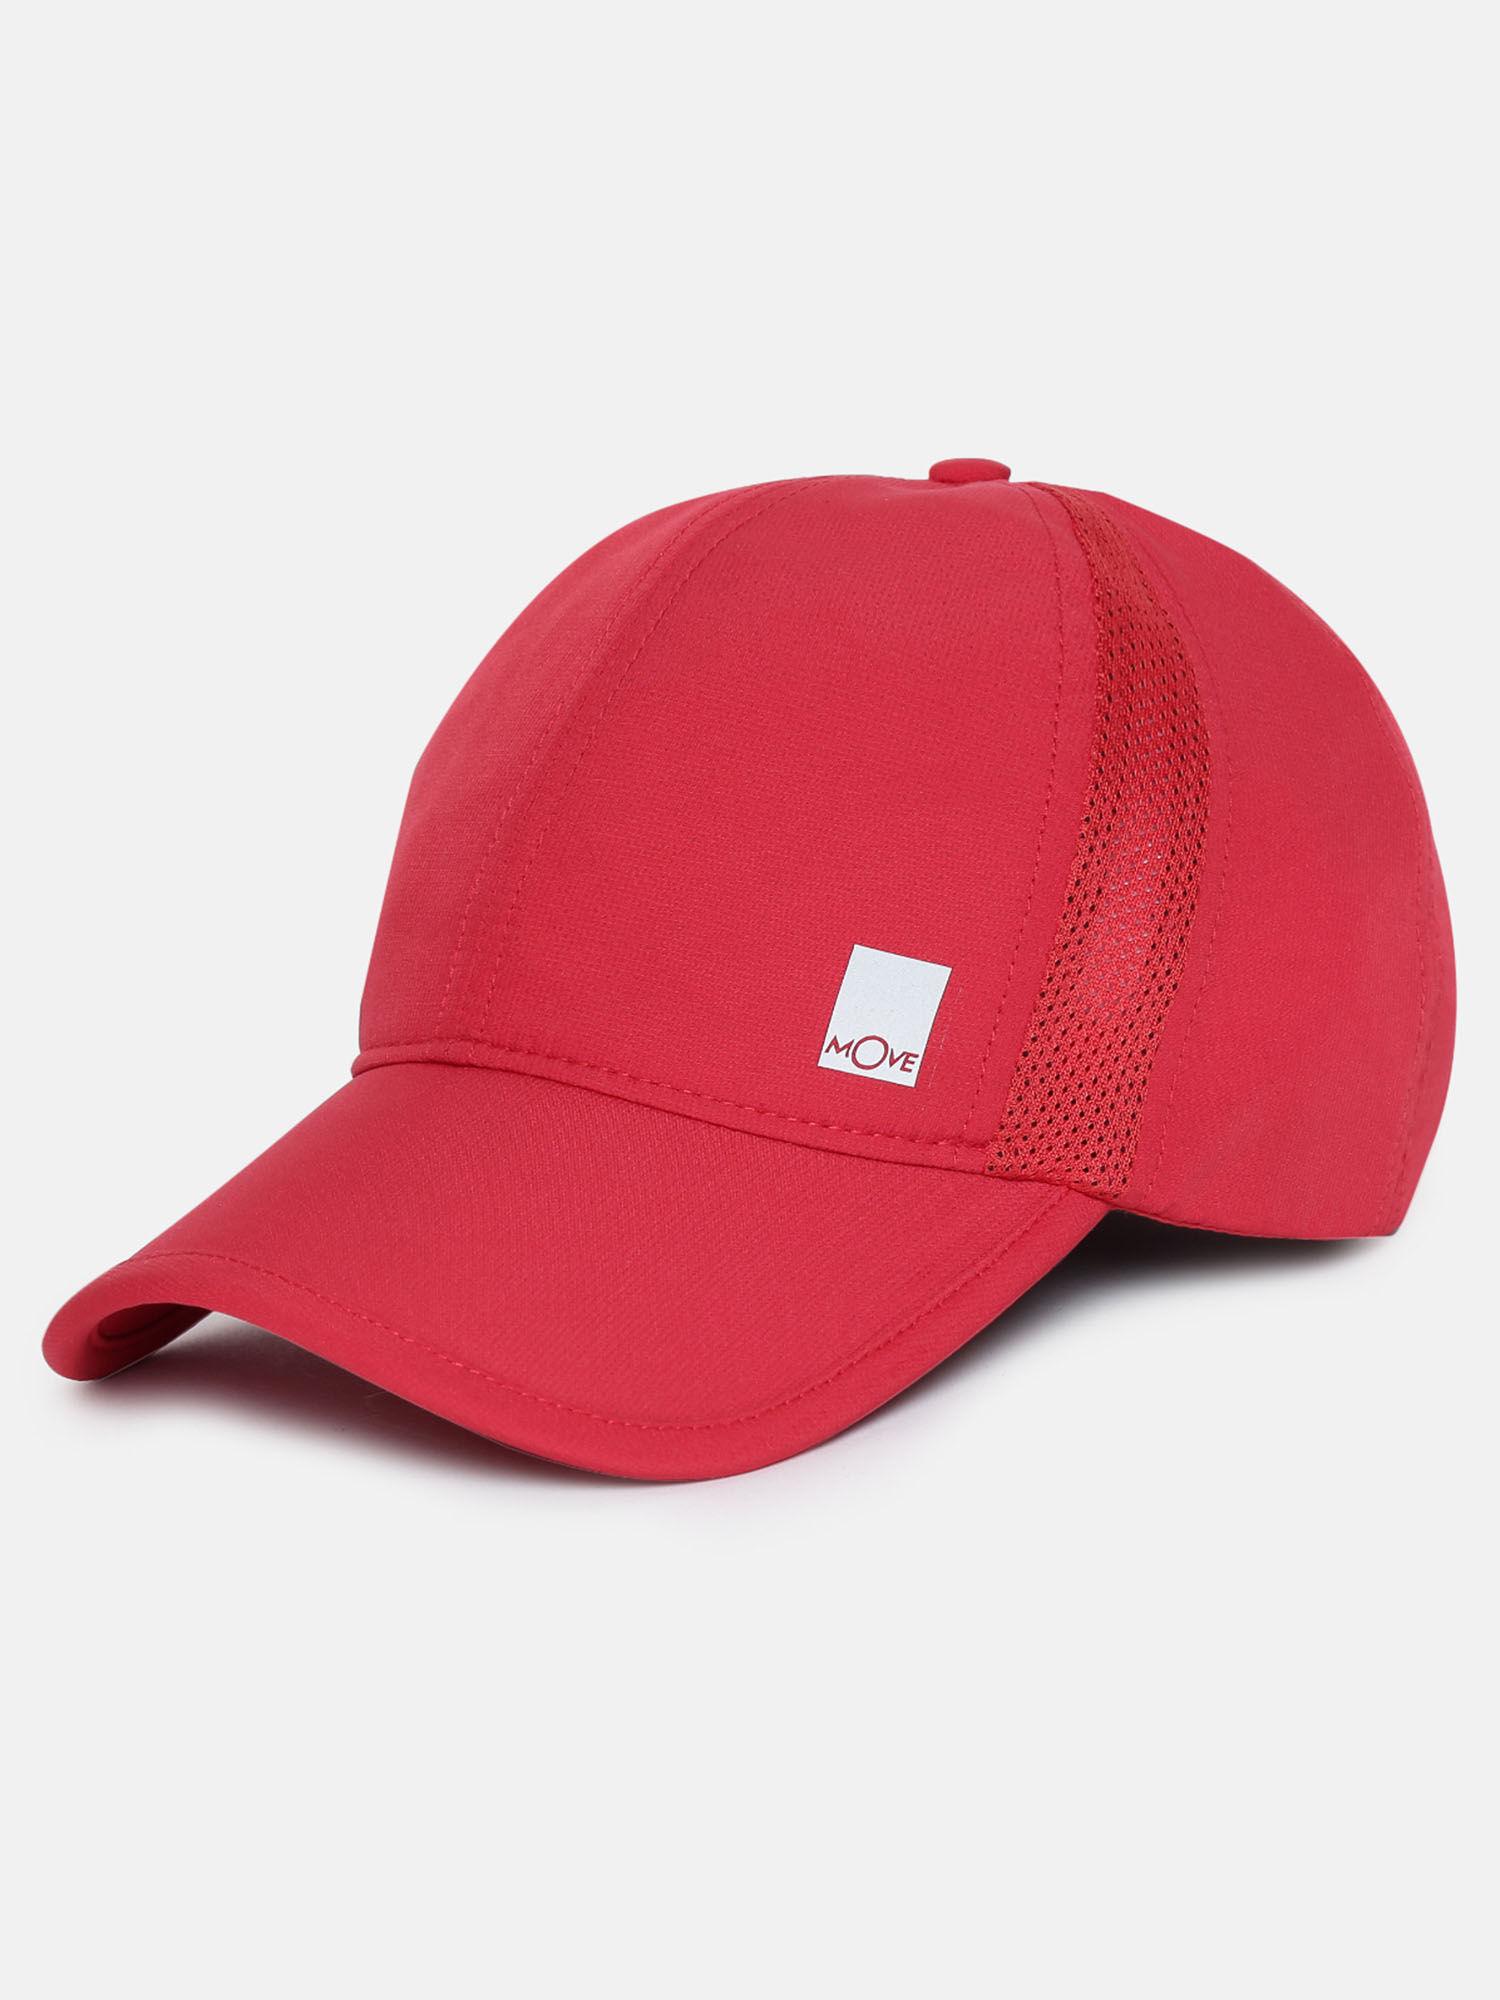 cp21-polyester-solid-cap-with-adjustable-back-closure-and-stay-dry-bright-red